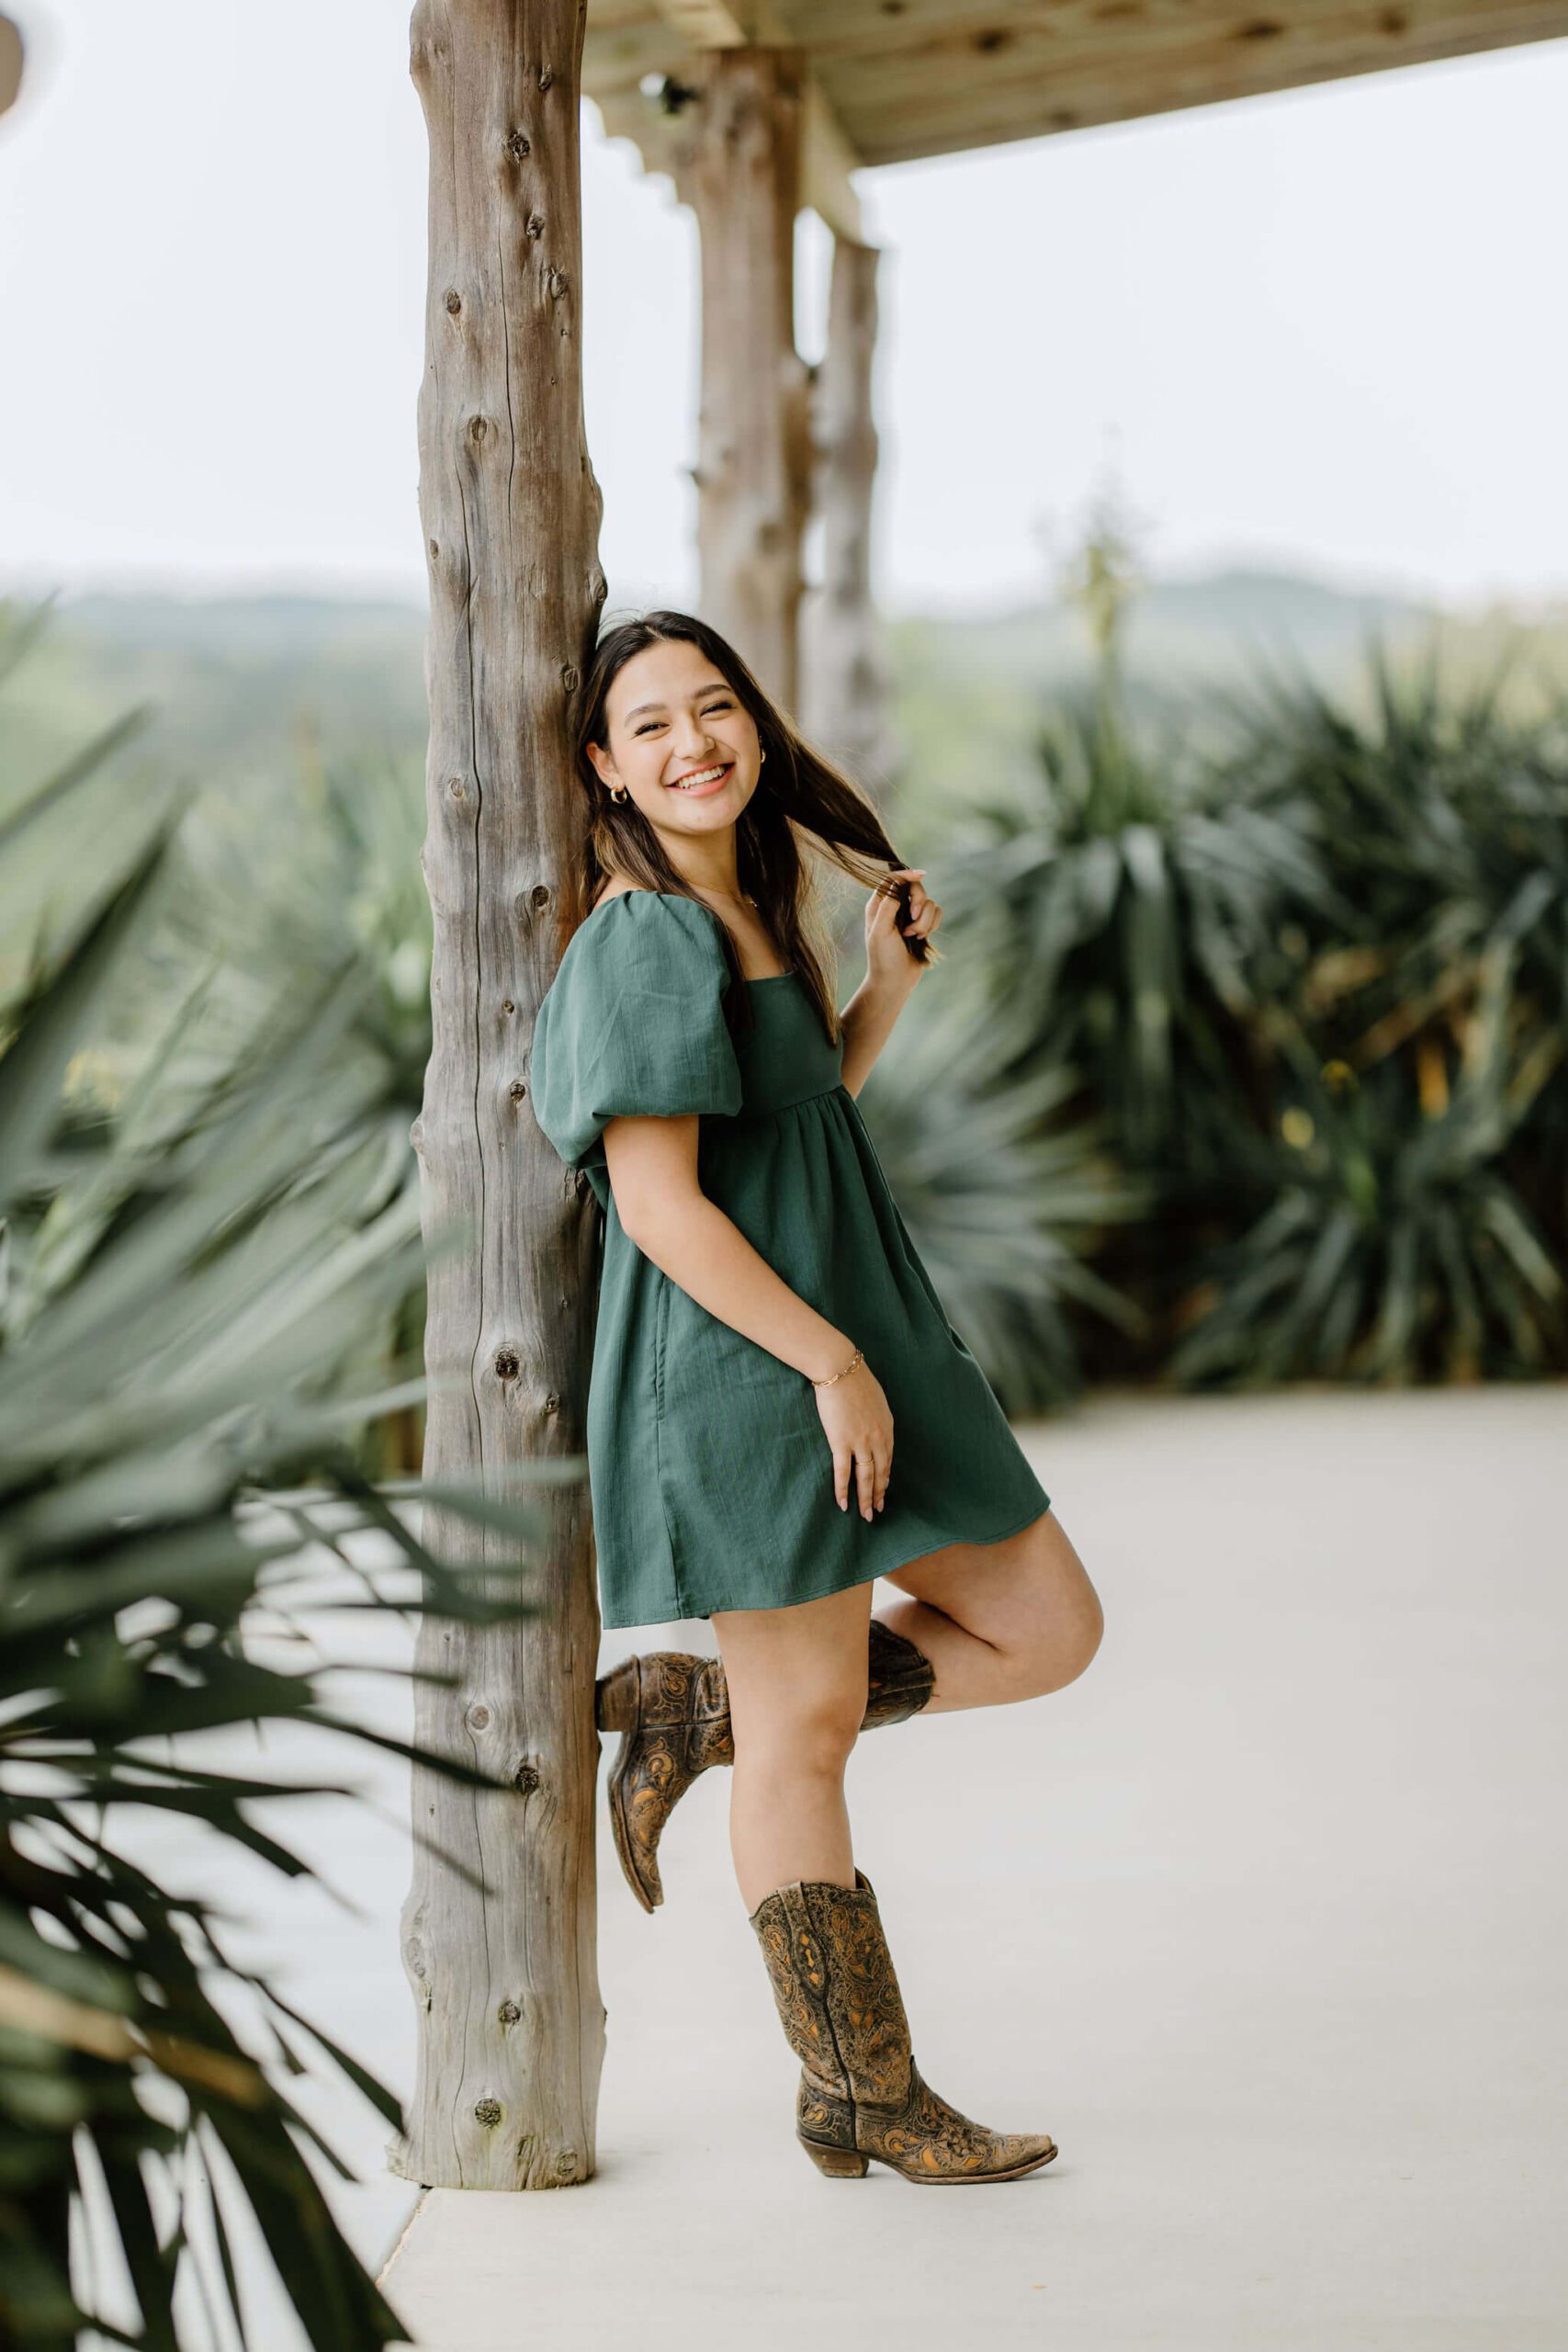 Candid portrait of Longview, TX senior girl in green dress and boots at El Cerrito Lodge.